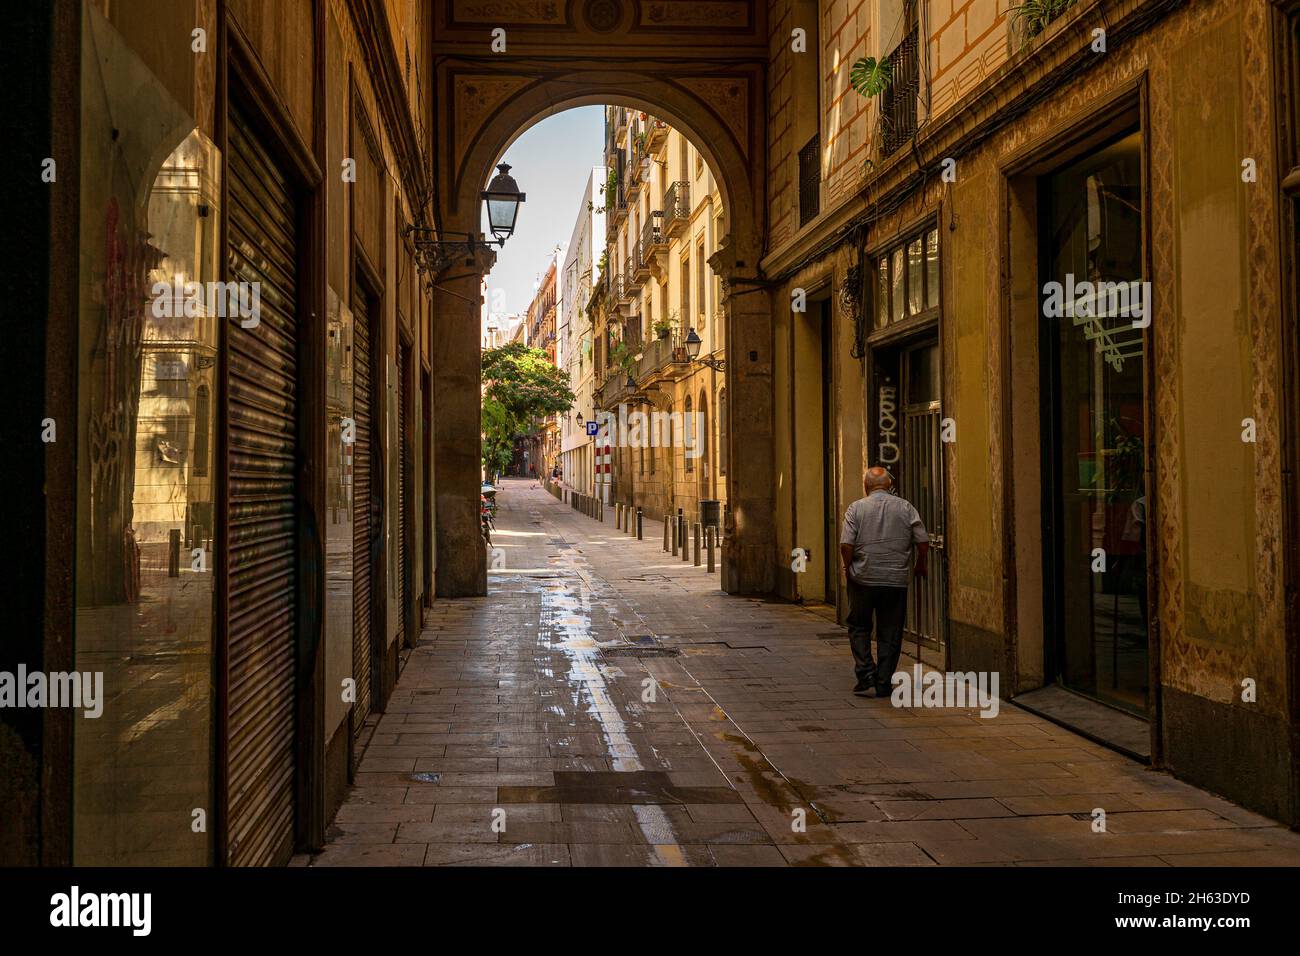 impressions of barcelona - a city on the coast of northeastern spain. it is the capital and largest city of the autonomous community of catalonia,as well as the second most populous municipality of spain. Stock Photo